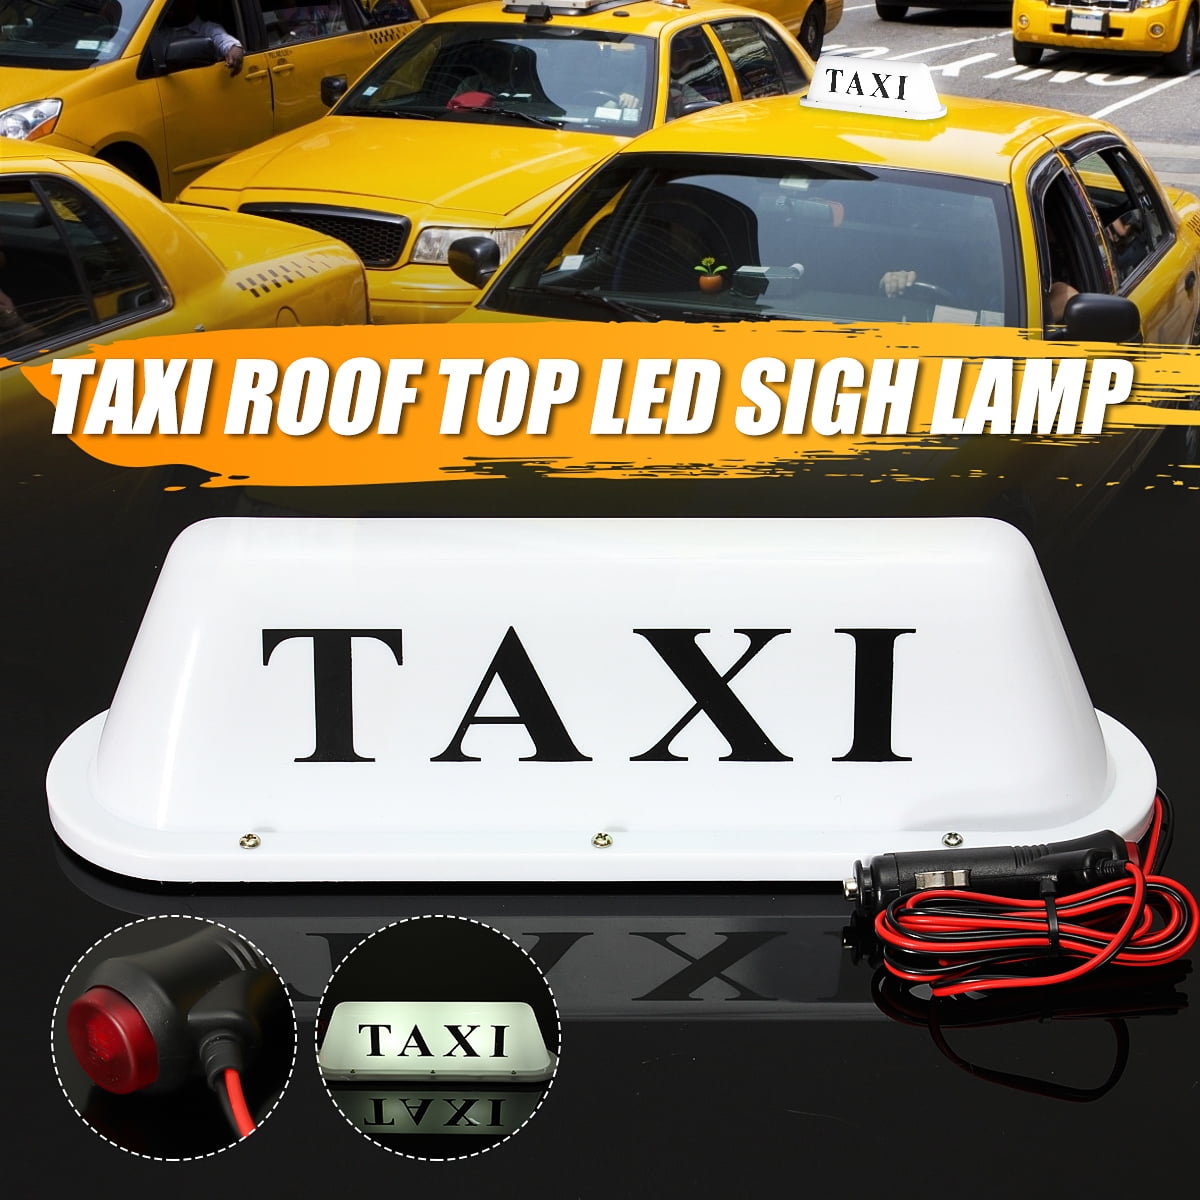 Cuque Car Taxi Cab Roof Top Sign Light Lamp 12V Automobile Taxi Sign Indicator Lamp Blue